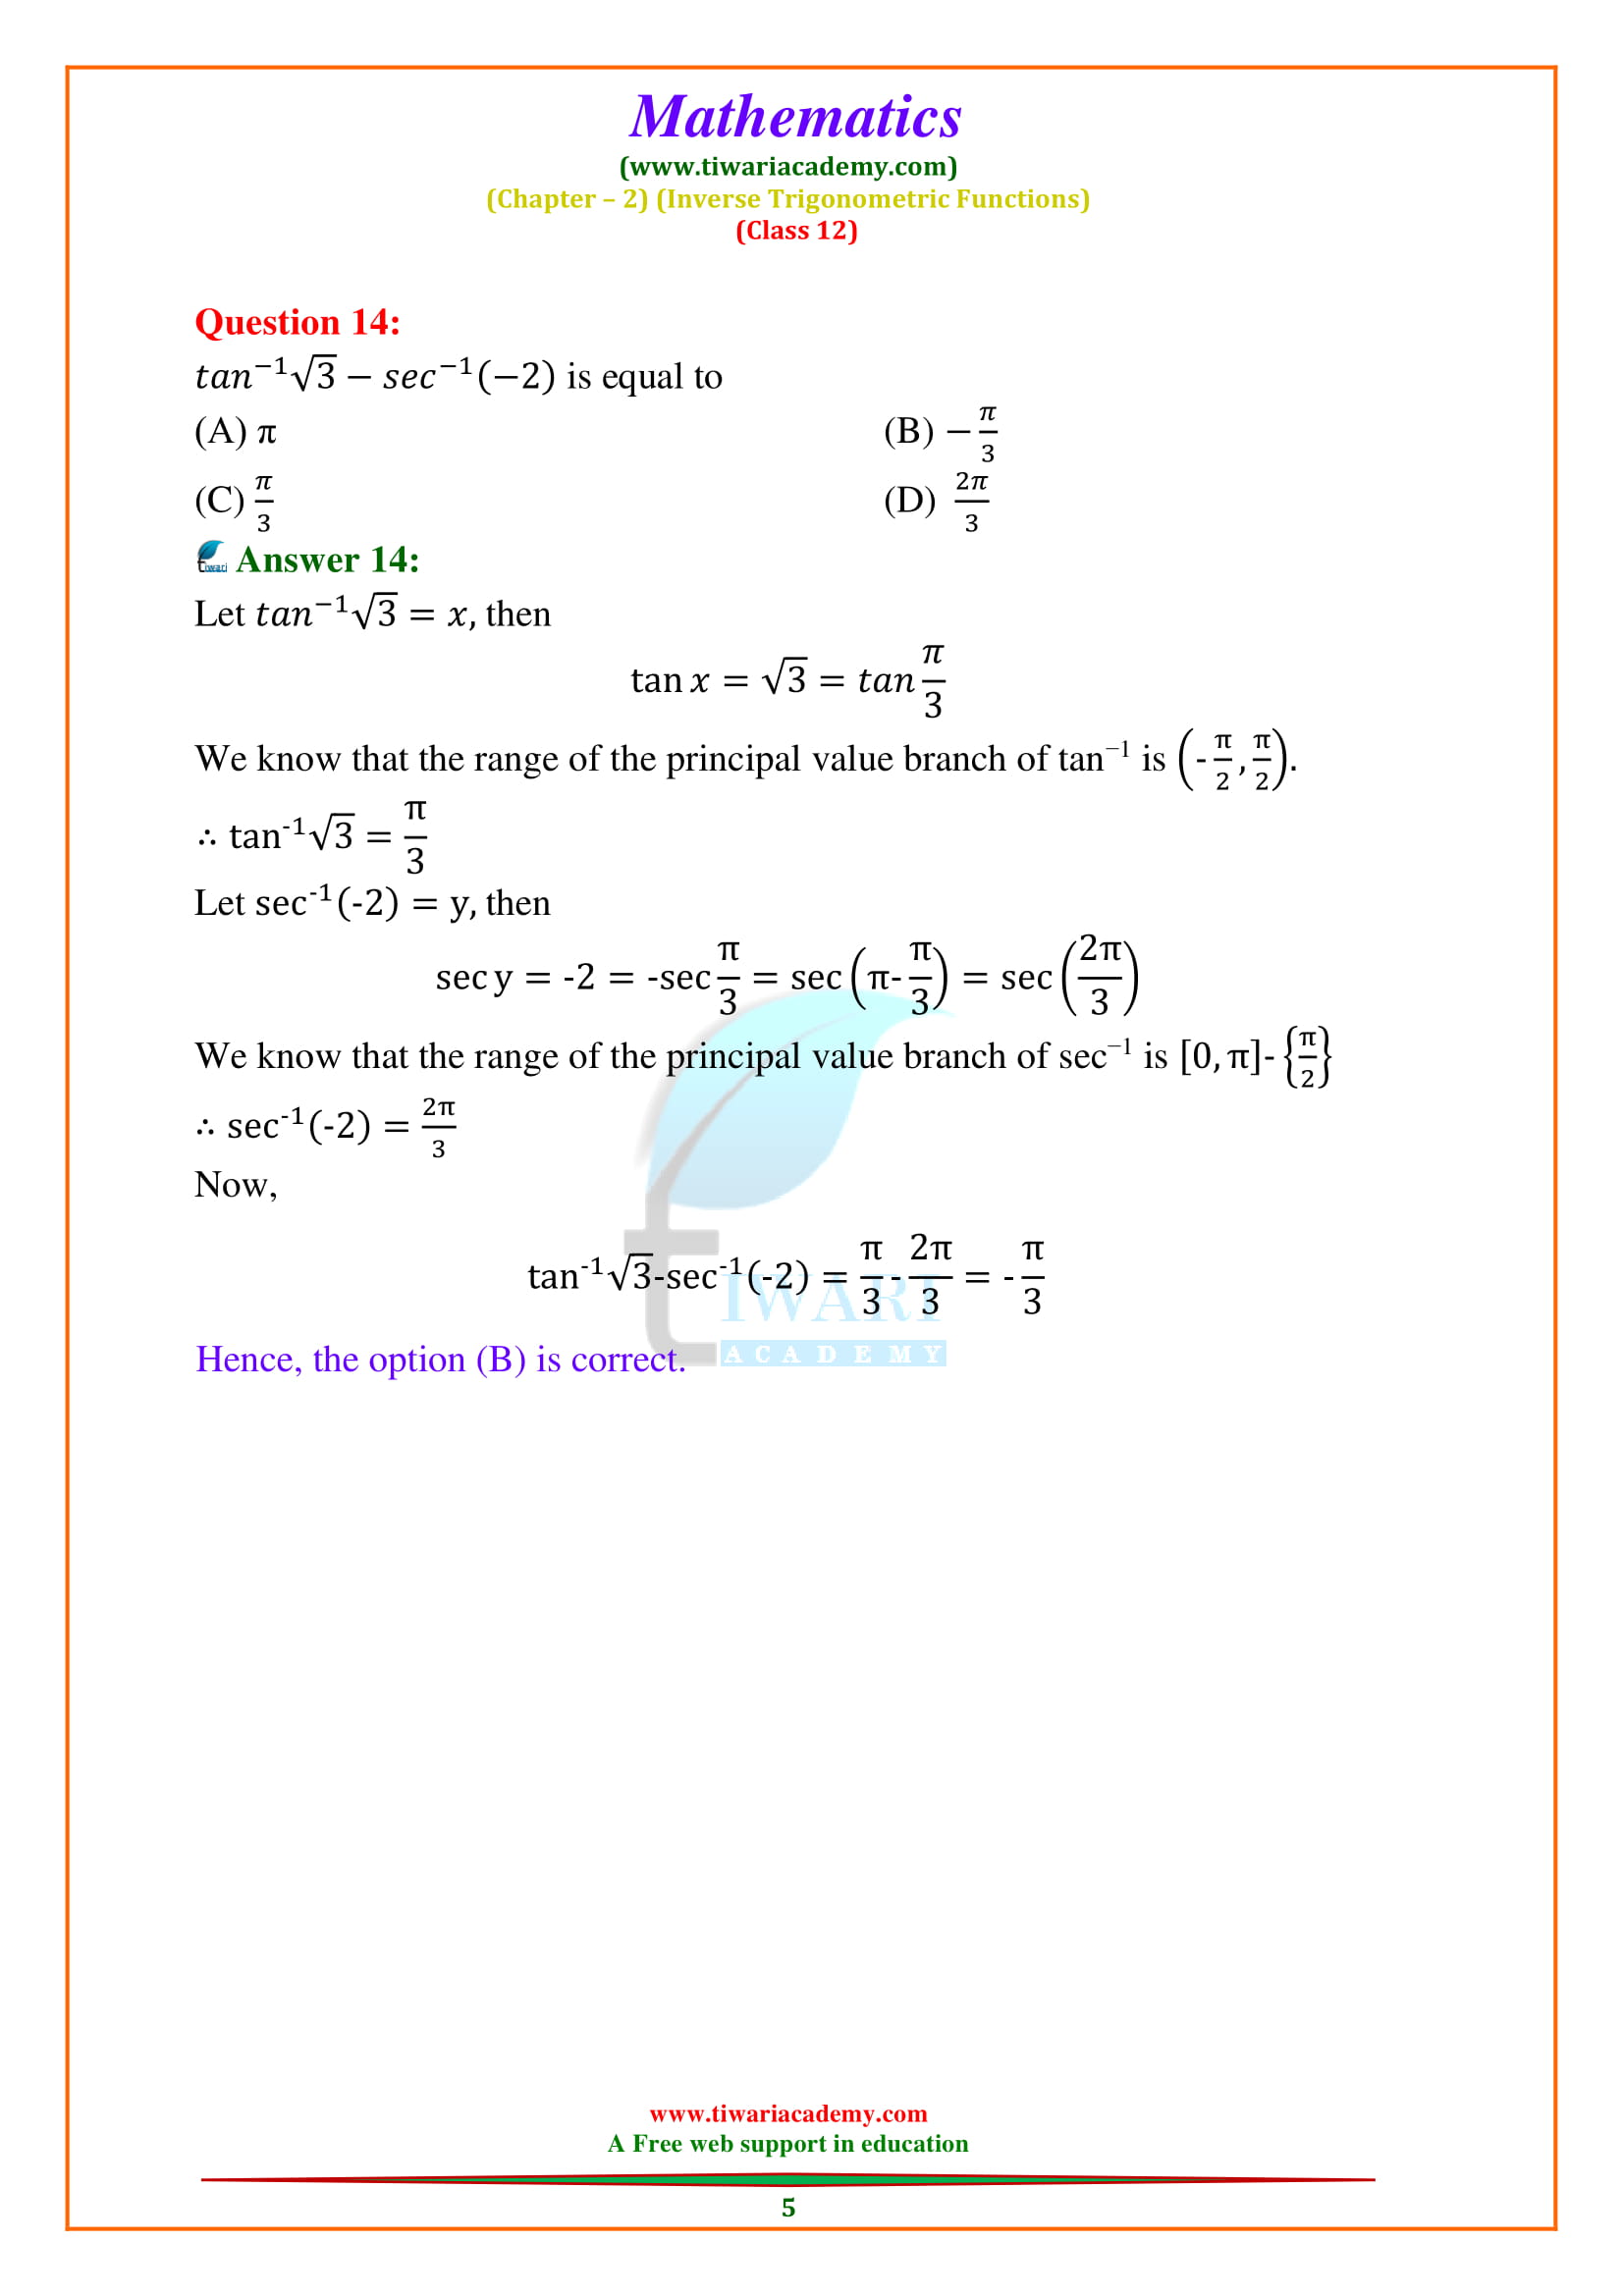 12 Maths Chapter 2 Exercise 2.1 Solutions for CBSE & UP Board 2018-2019